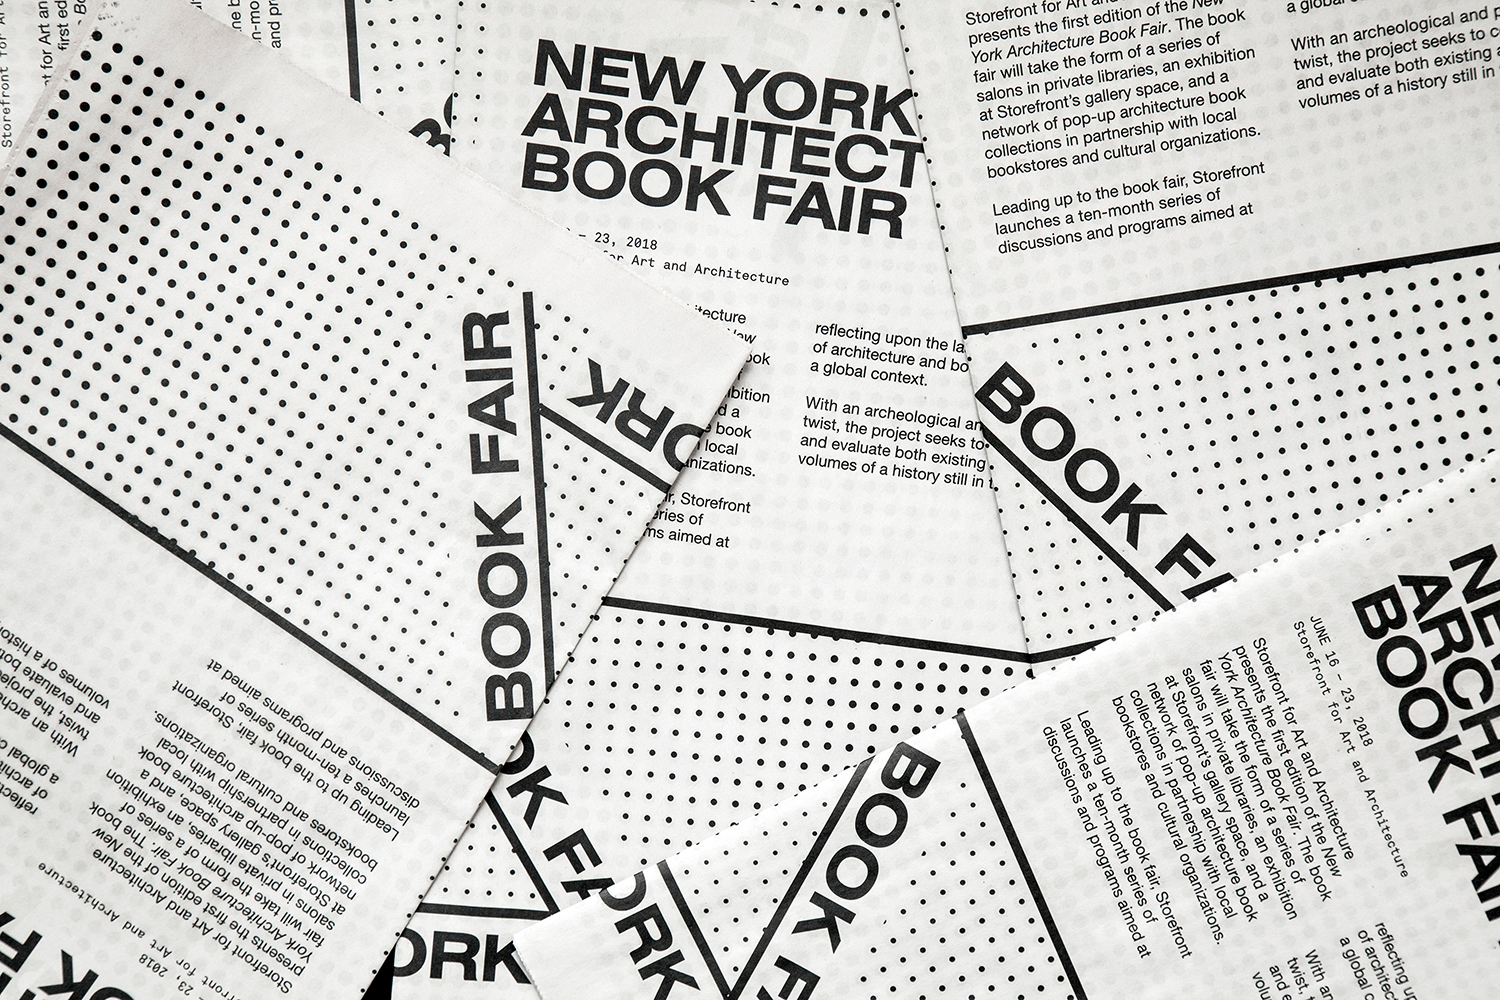 The Best New Graphic Design of December 2018 – New York Architecture Book Fair by Pentagram